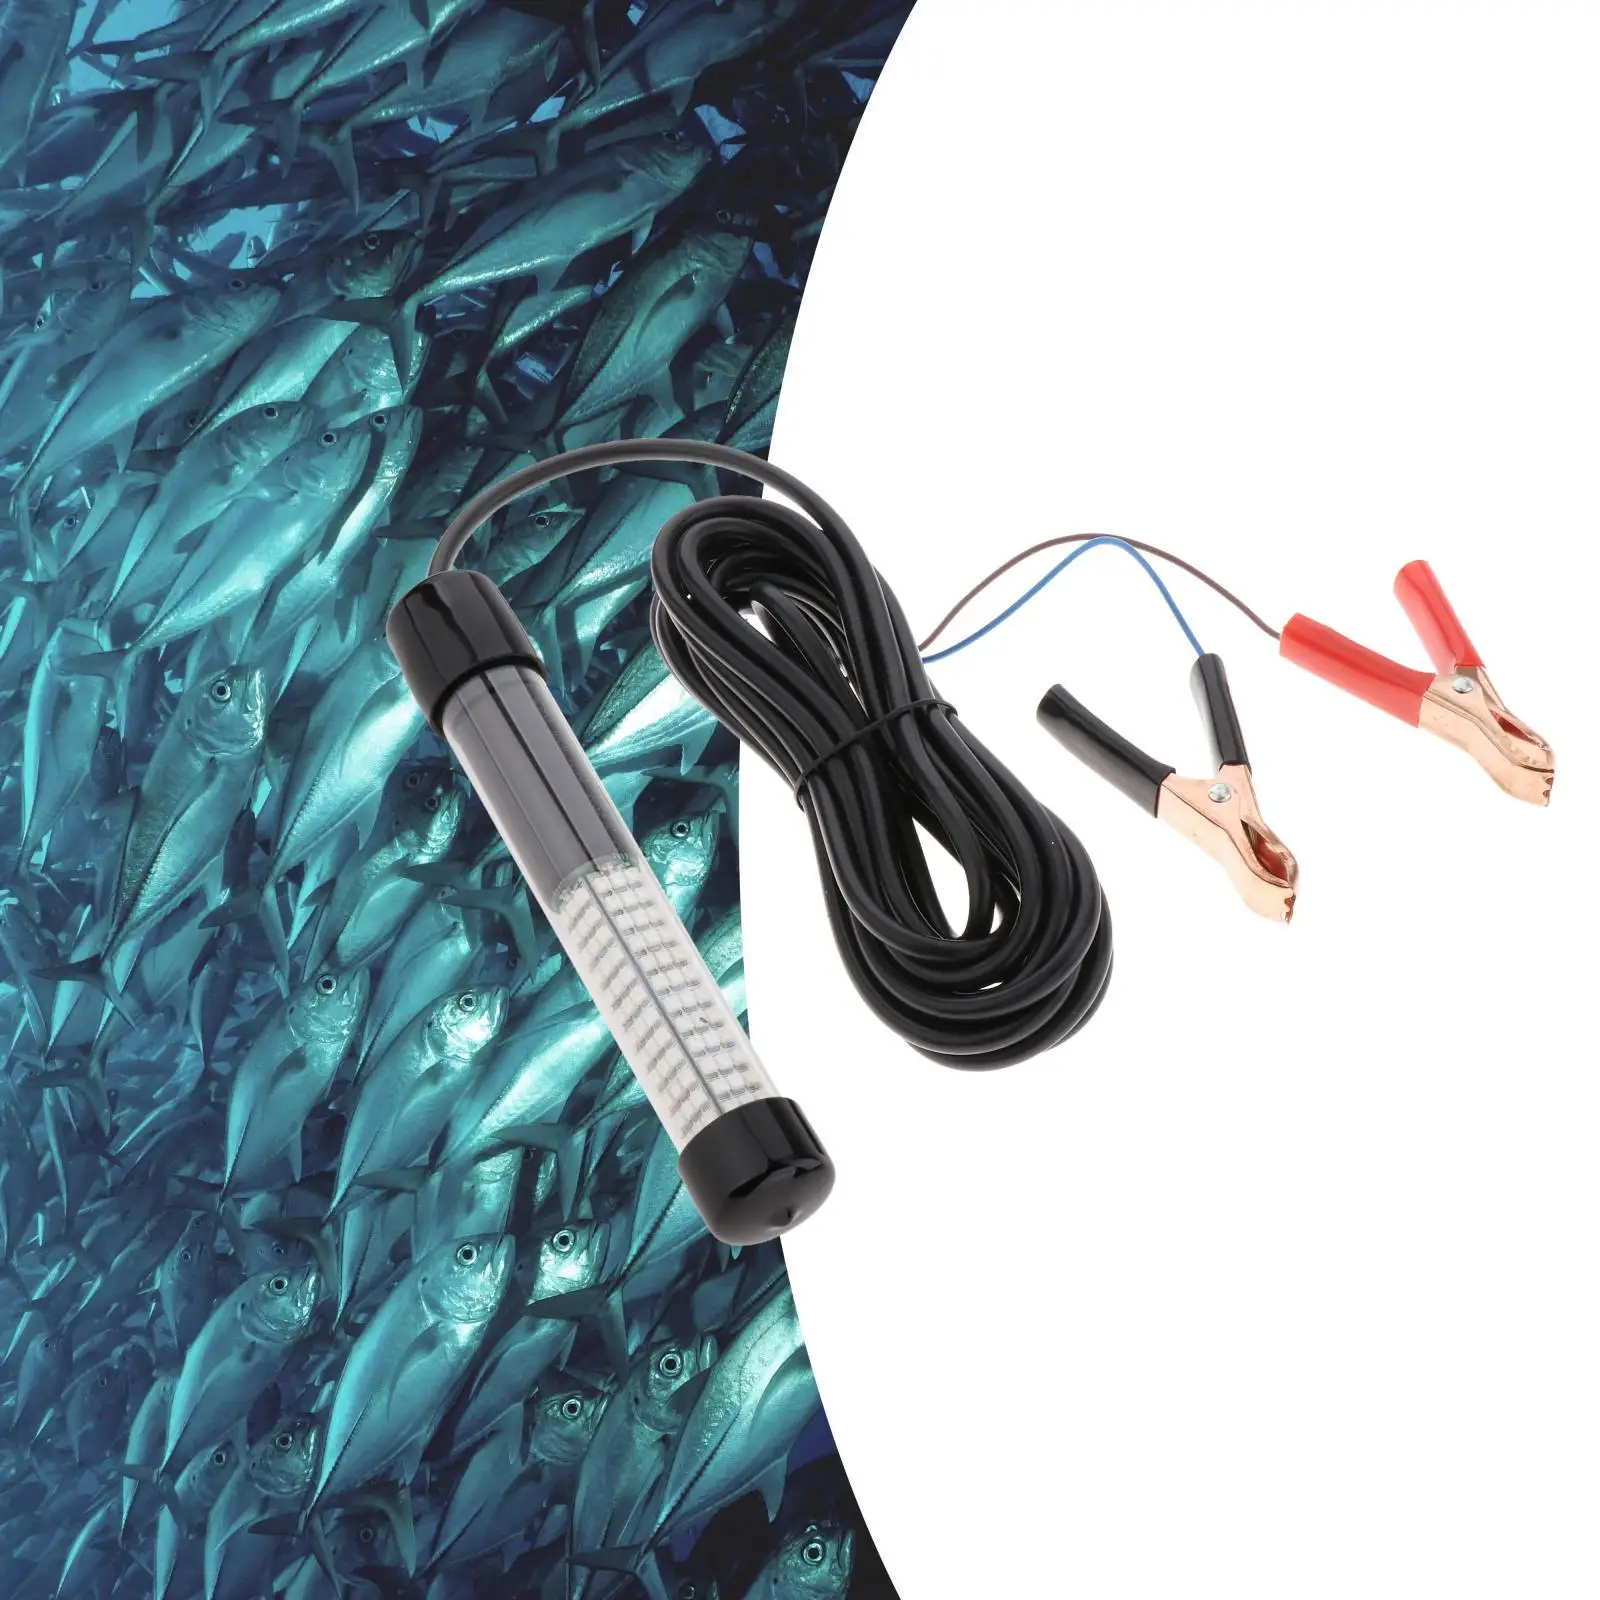 Submersible Fishing Light 12V Waterproof with 5M Cord Clip Portable 20W Underwater Fishing Light Crappie for Ice Fishing